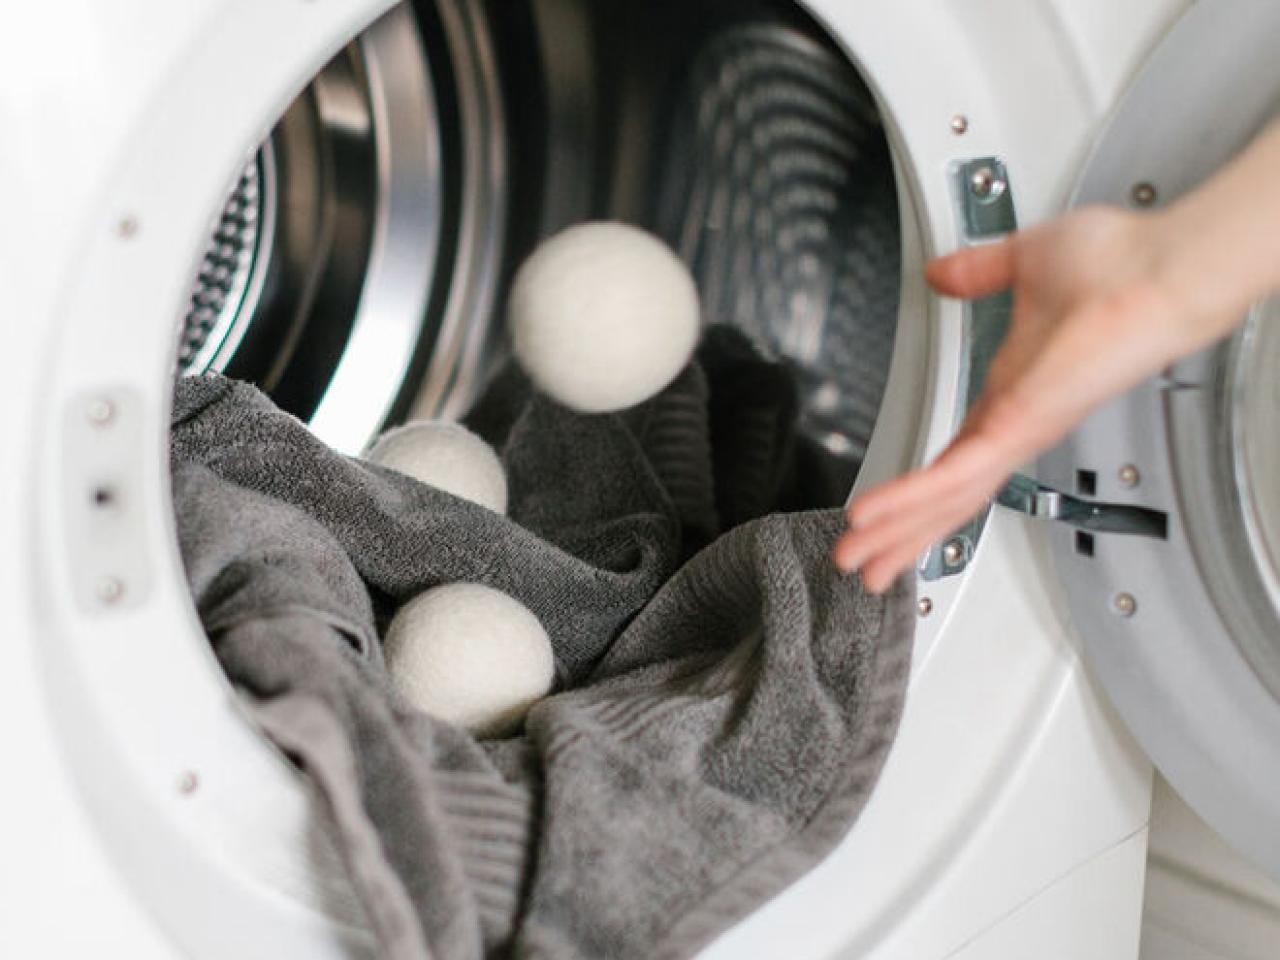 How to dry laundry outside quickly and prevent clothes 'smelling damp